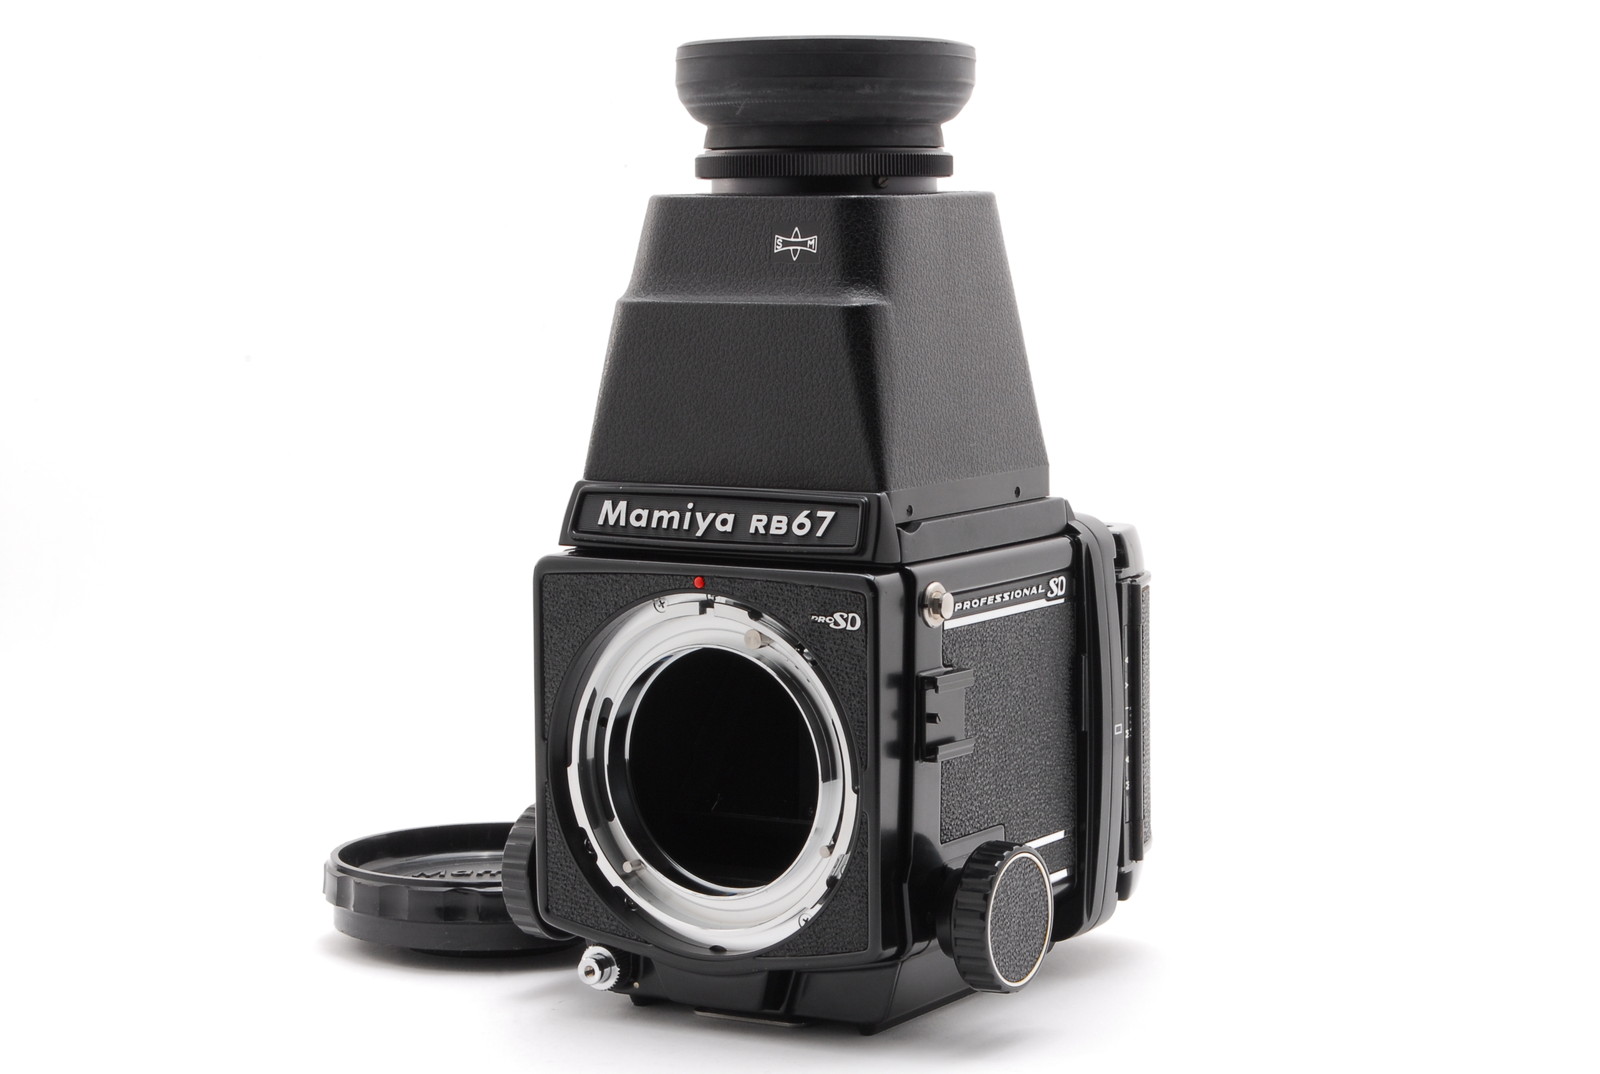 PROMOTION. BODY OVERHAULED Mamiya RB67 Pro SD, 120 Film Back, Chimney Scope Magnifier Finder, Body Cap from Japan